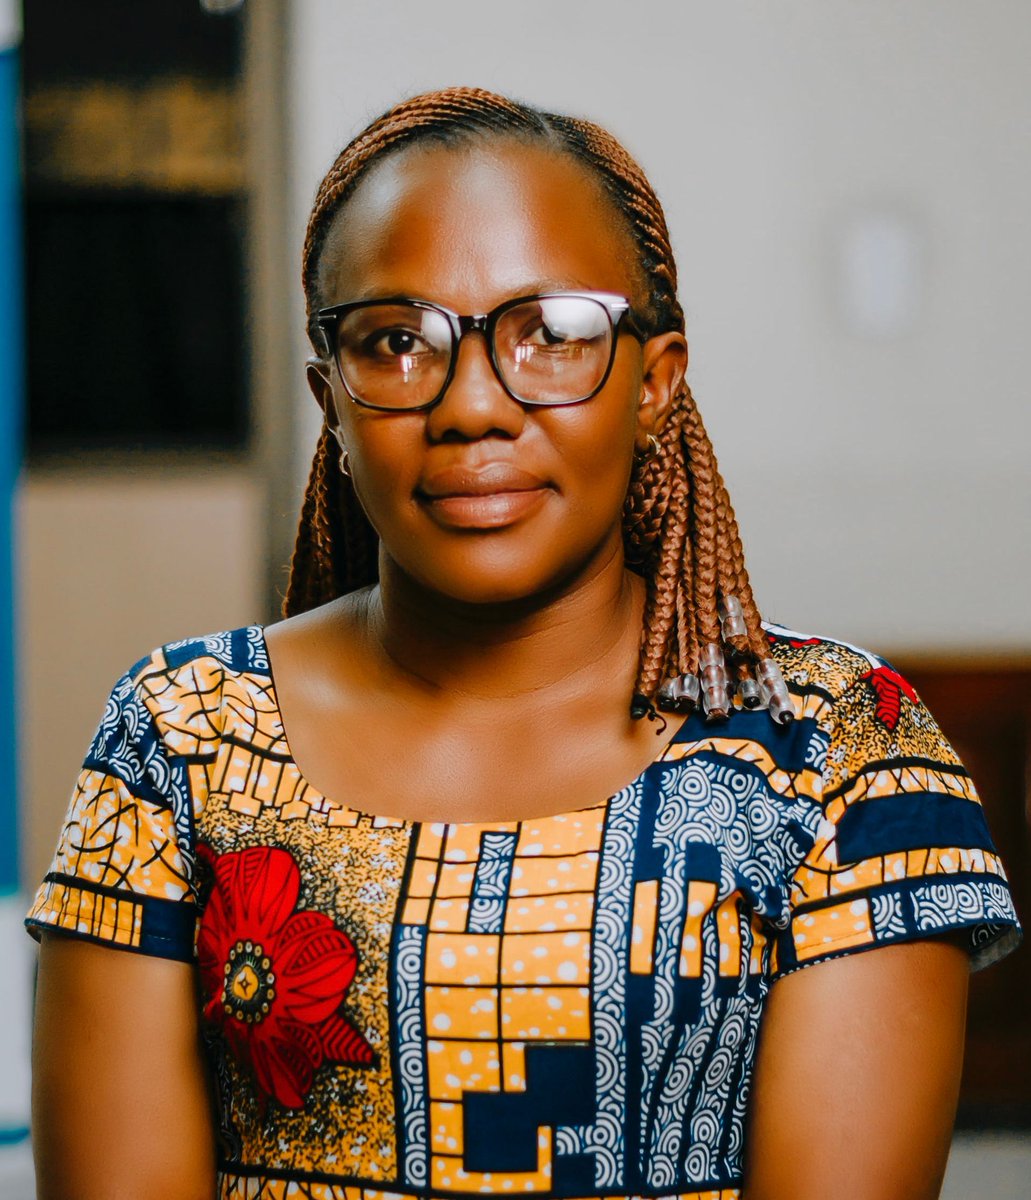 Meet the ASAPbio Fellows! Grantina Modern @GrantinaM is a lecturer at the Nelson Mandela African Institution of Science and Technology and a PhD fellow at the University of Dar es Salaam. Grantina is looking forward to advocating for the importance of preprints in research.